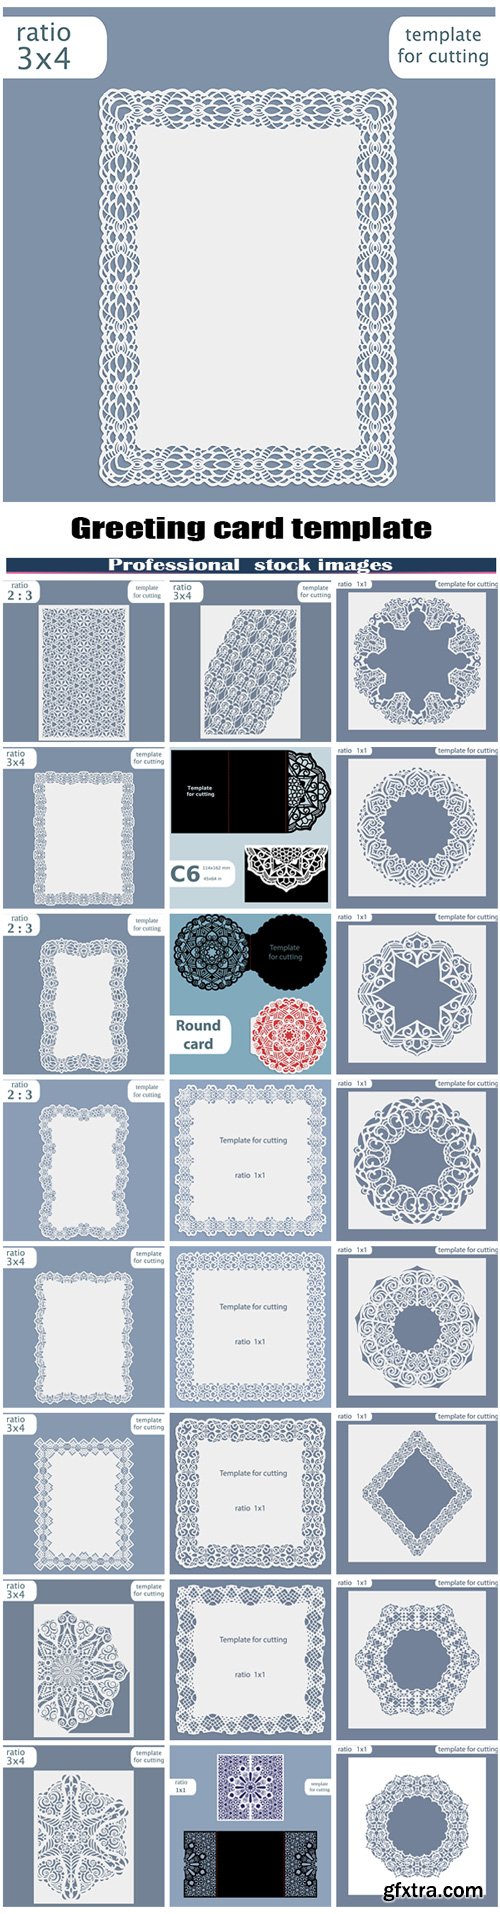 Greeting card template for cutting plotter # 10